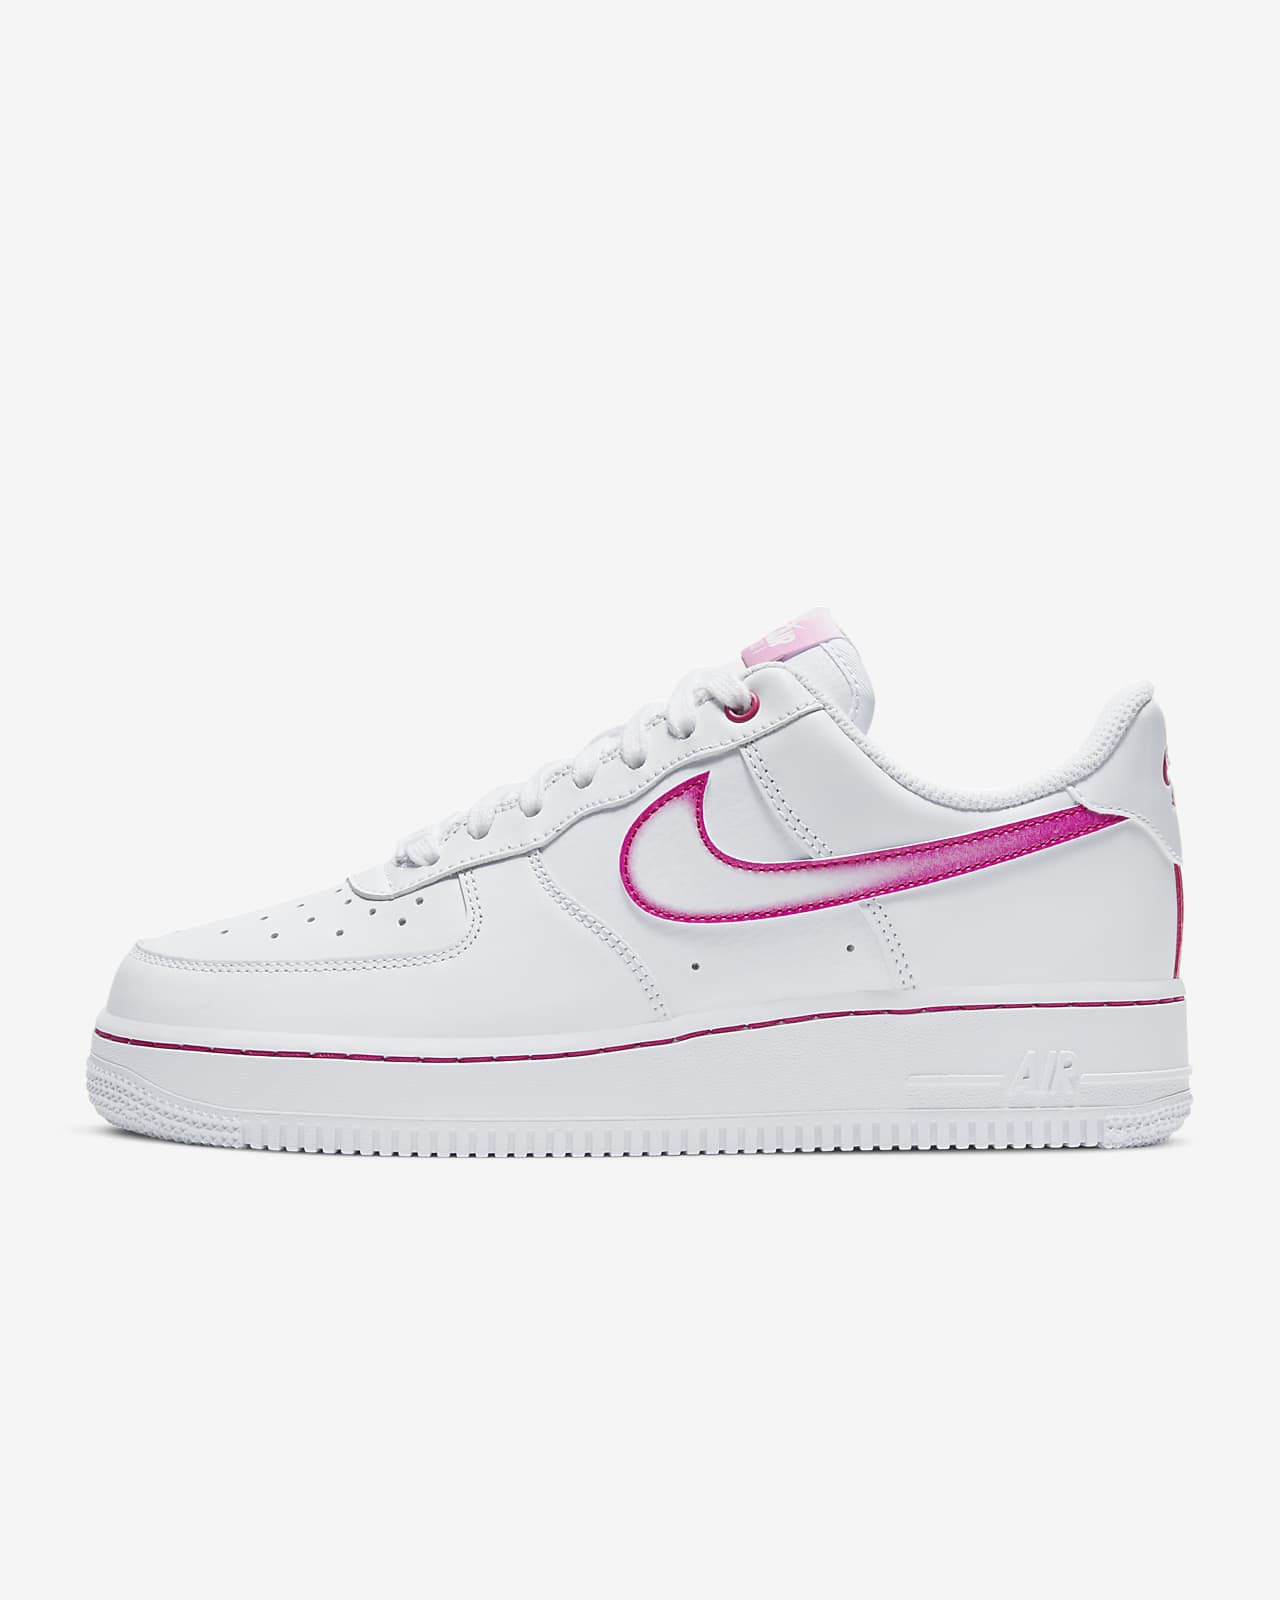 womens nike air force 1 07 size 7